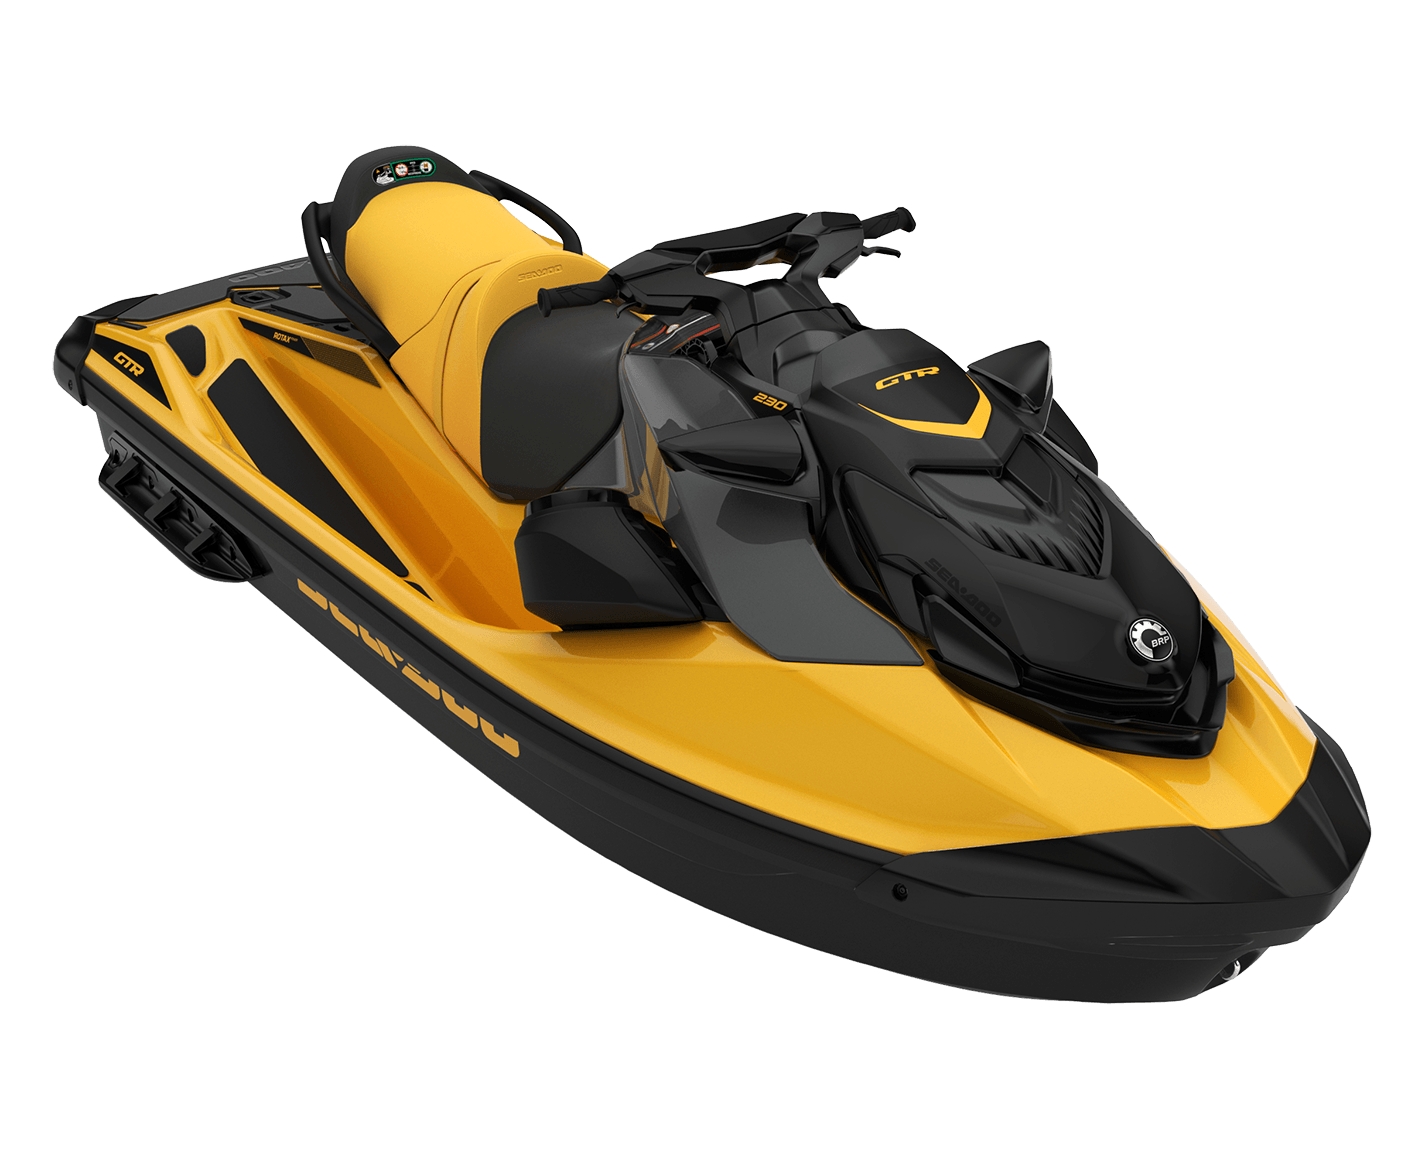 Watercraft For Sale at I-90 Motorsports in Issaquah, WA